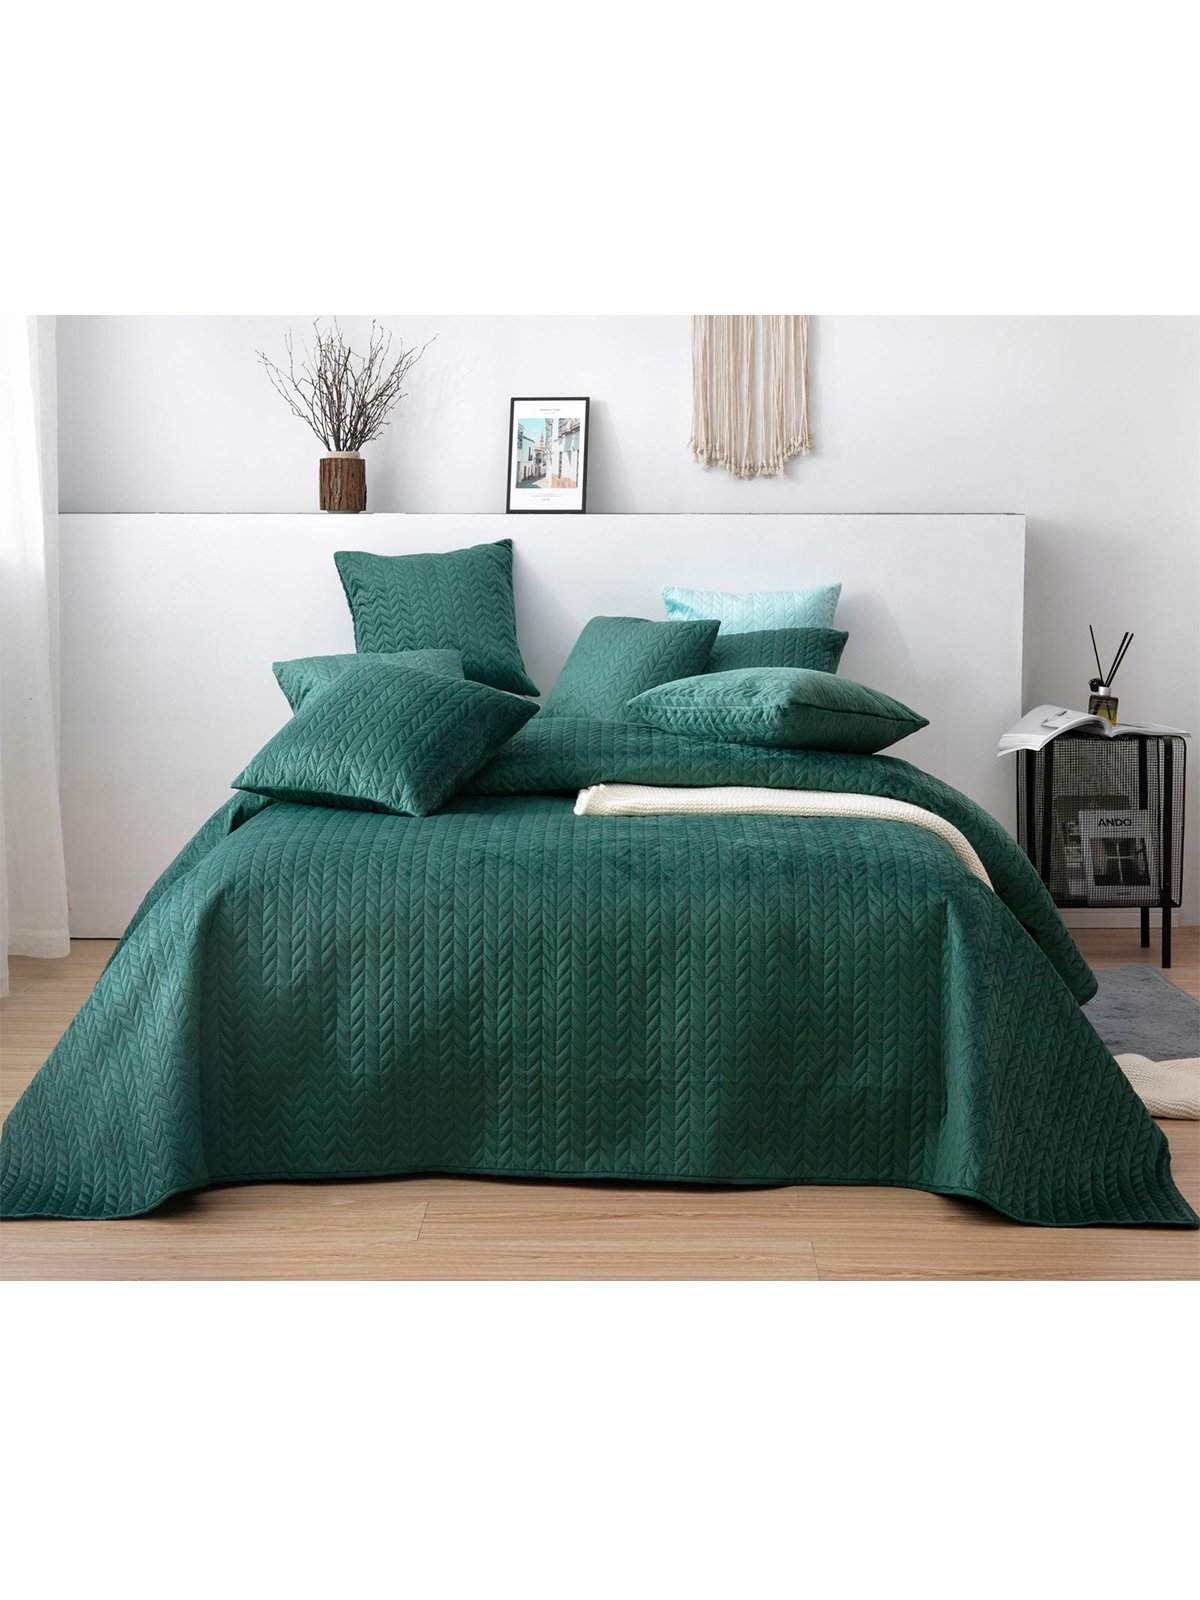 Edoti Quilted bedspread